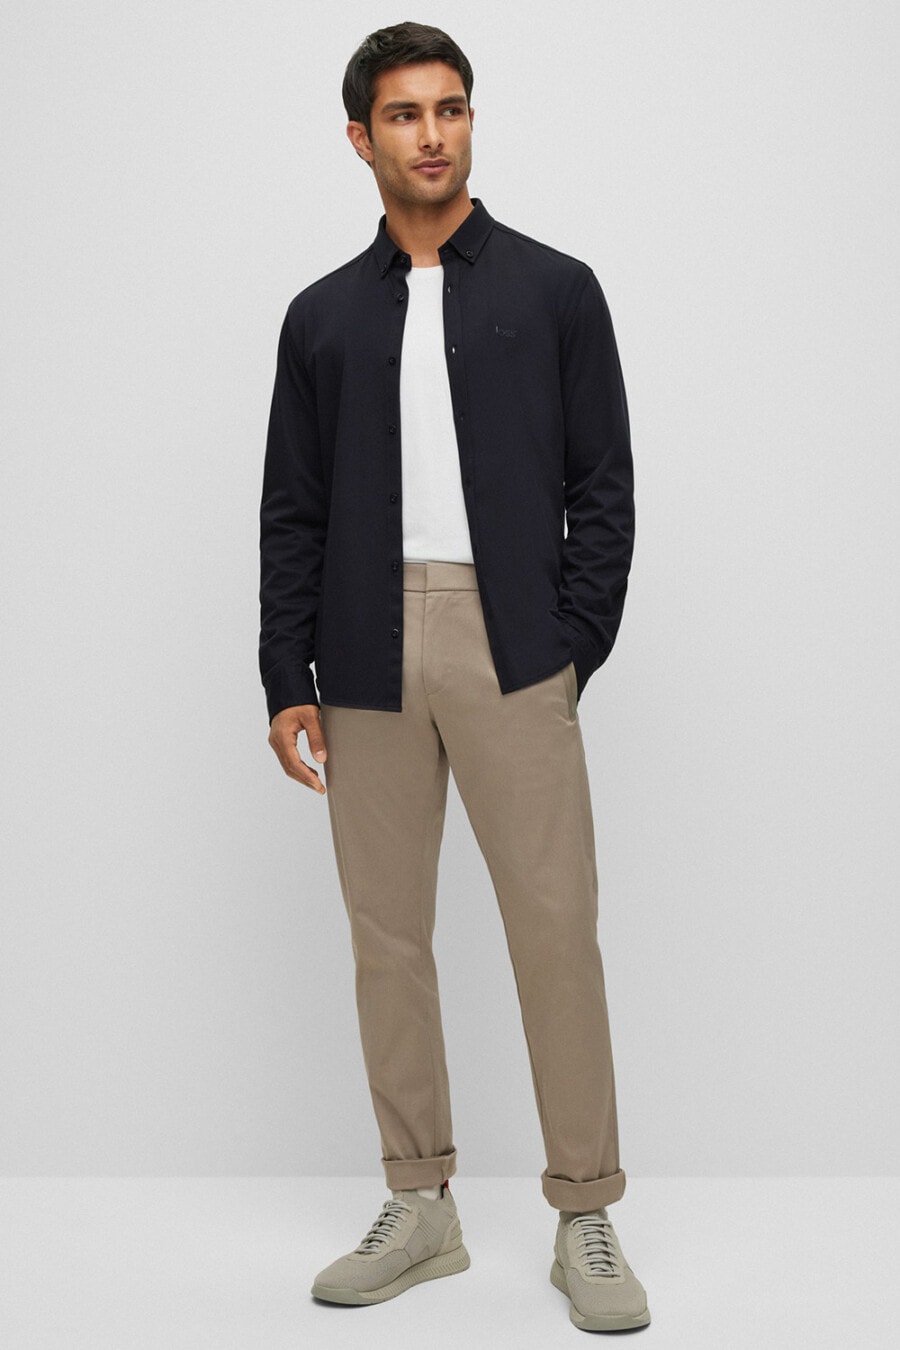 Men's khaki pants, white tucked in T-shirt, navy blouson jacket and grey suede sneakers outfit